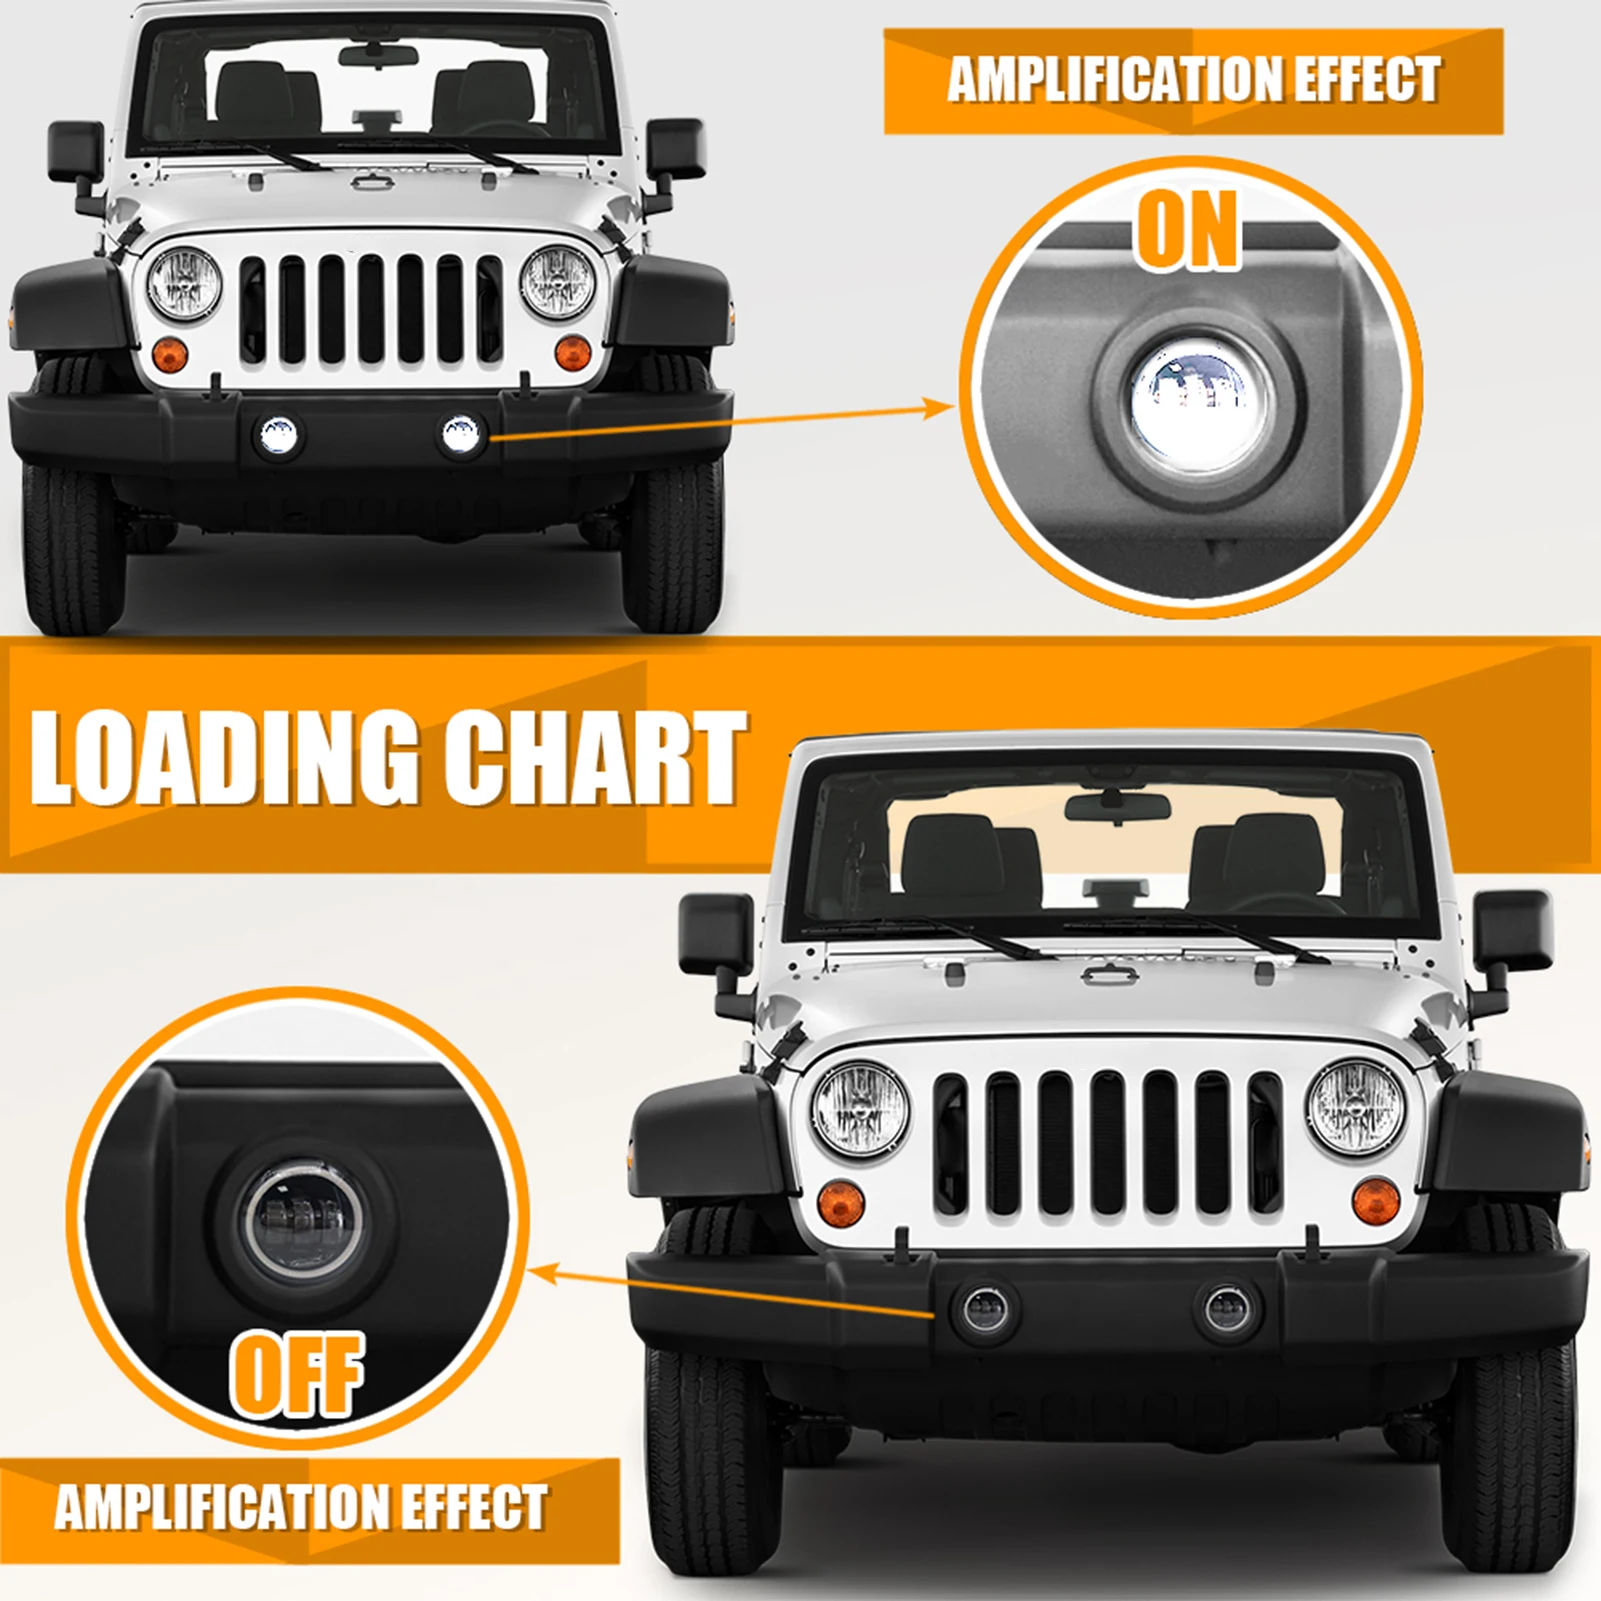 

60W 4inch Round Motorcycle LED Fog Lamp with White/Amber Replacement for Jeep Wrangler JK JKU LJ TJ Glide Road King Fatboy